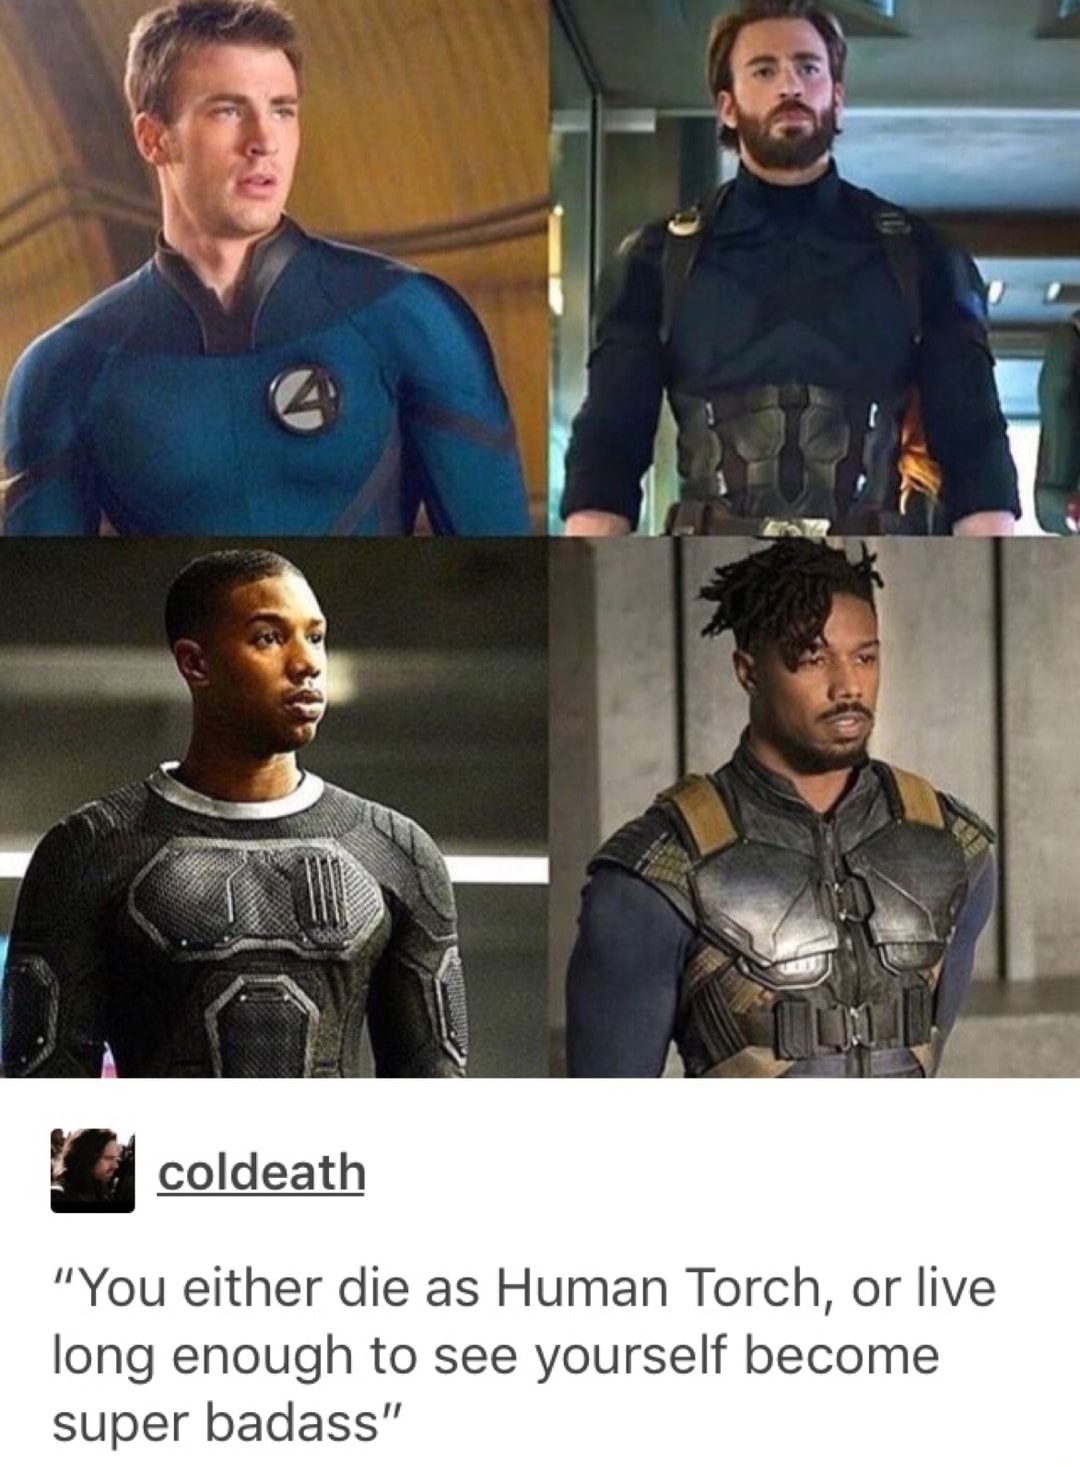 captain america killmonger human torch - coldeath "You either die as Human Torch, or live long enough to see yourself become super badass"